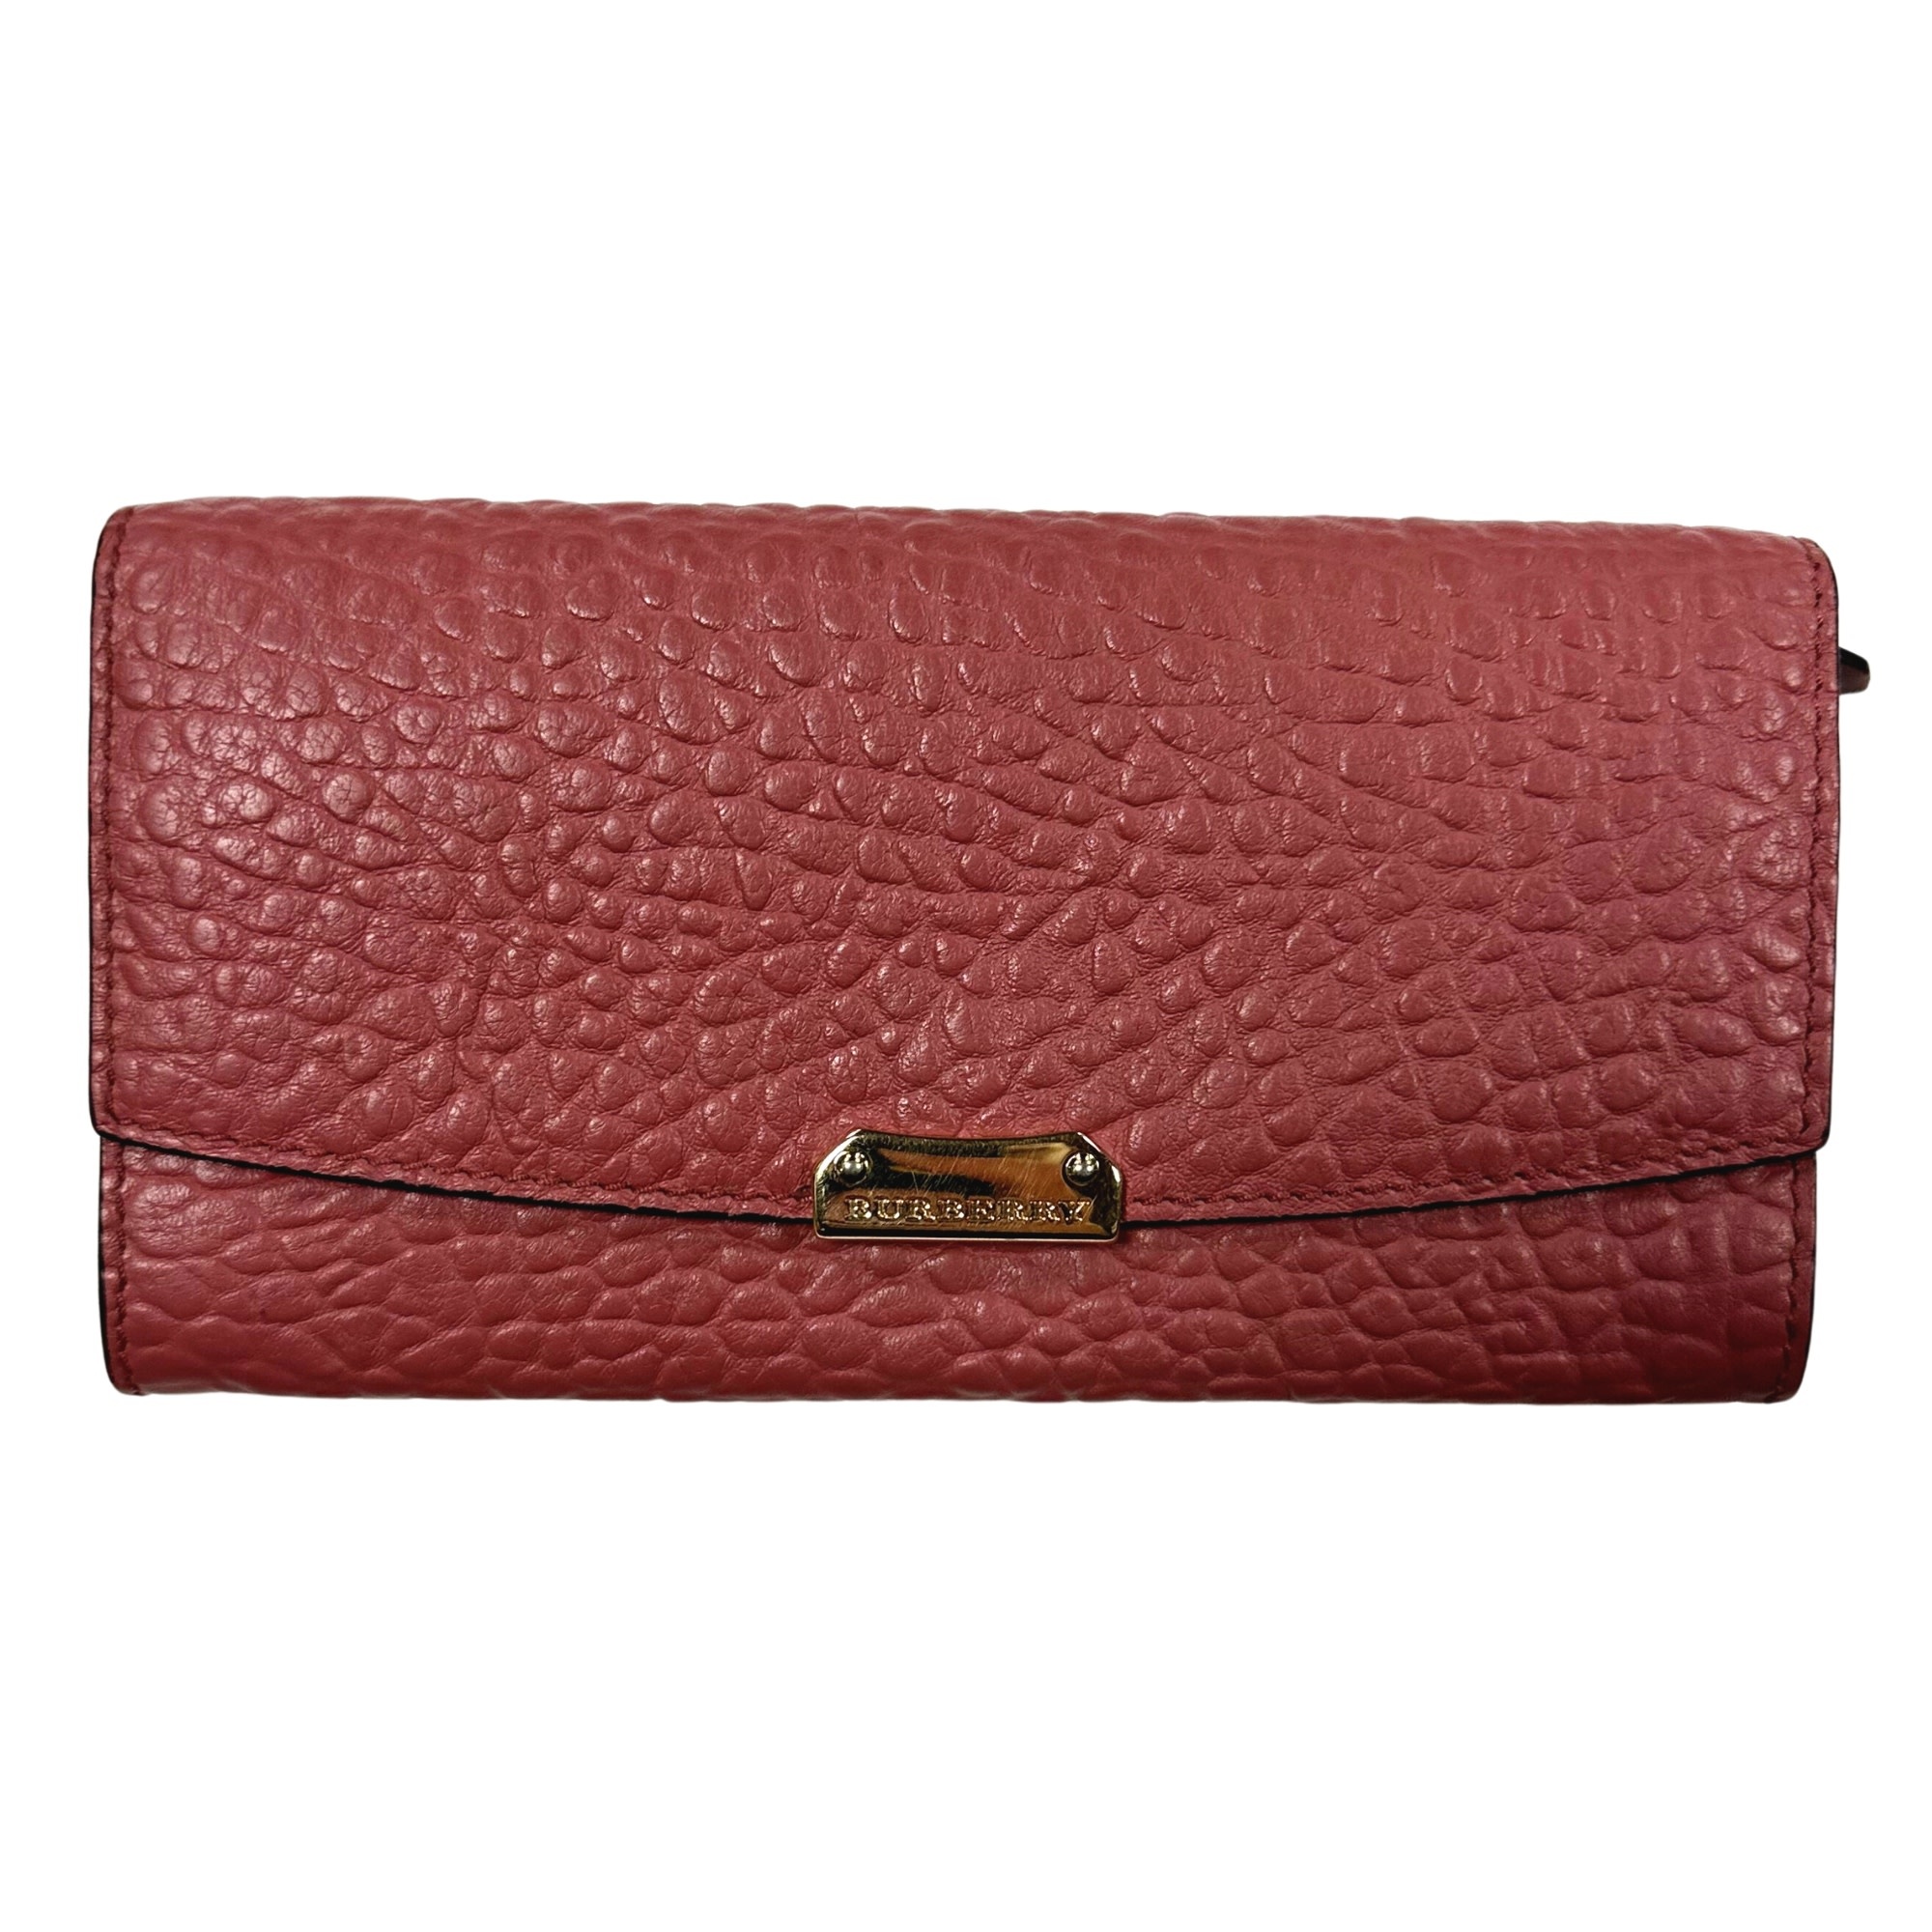 DUSTY PINK PEBBLED LEATHER CONTINENTAL WALLET